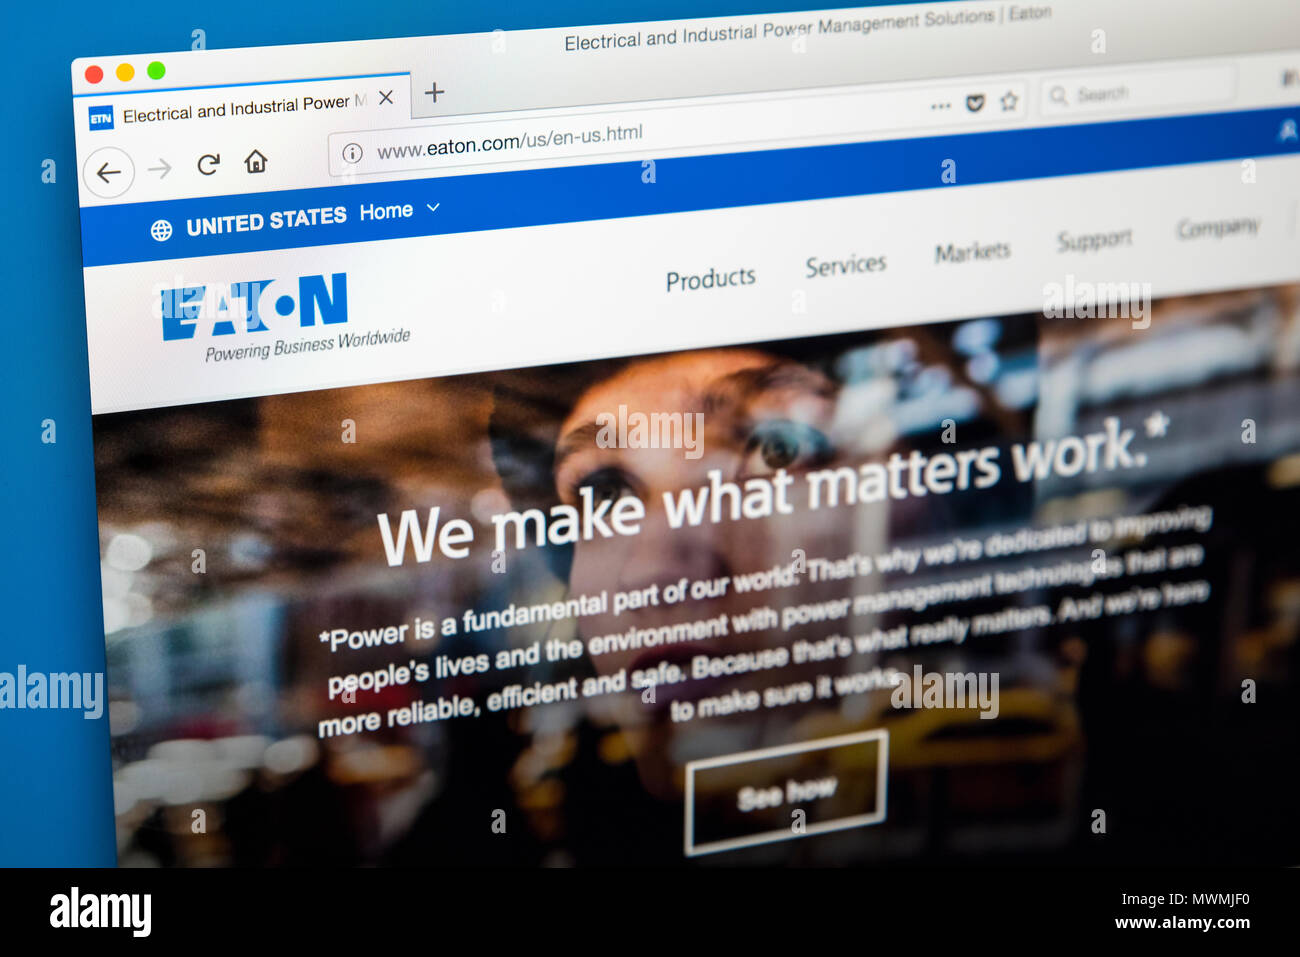 LONDON, UK - MAY 31ST 2018: The homepage of the official website for Eaton Corporation Plc - the multinational power management company, on 31st May 2 Stock Photo